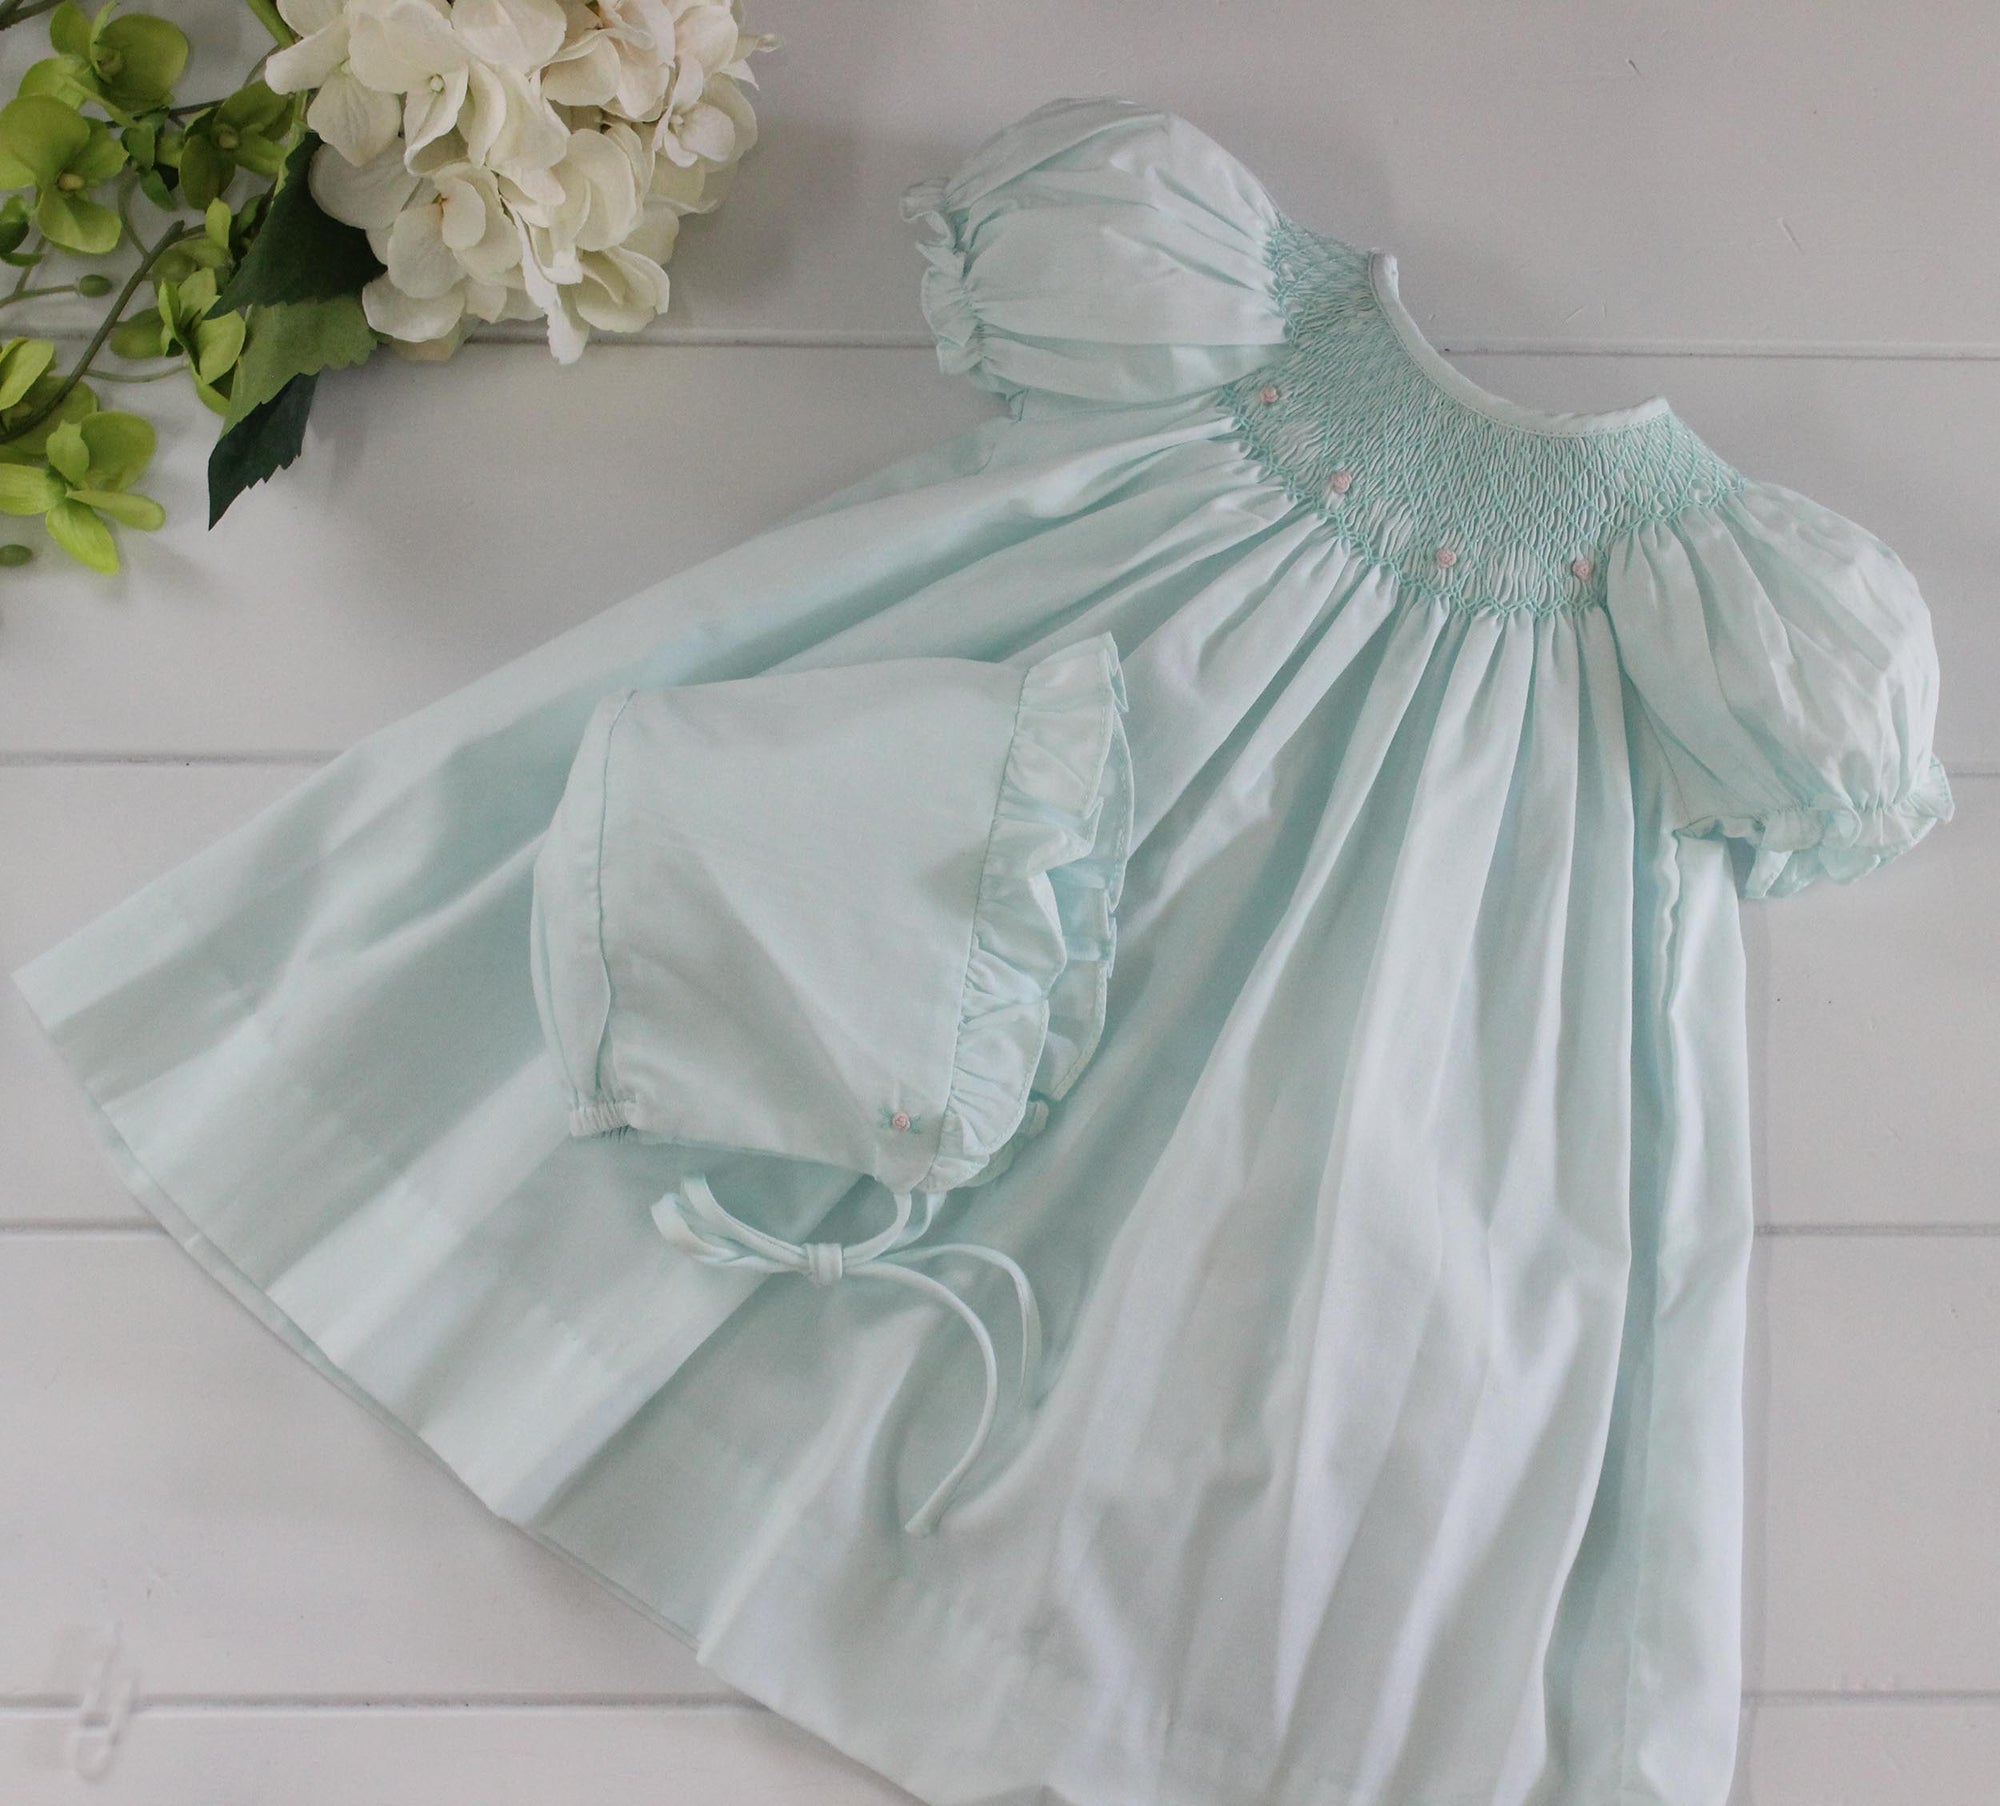 Infant Girls Day Gowns Make Beautiful Take Home Outfits